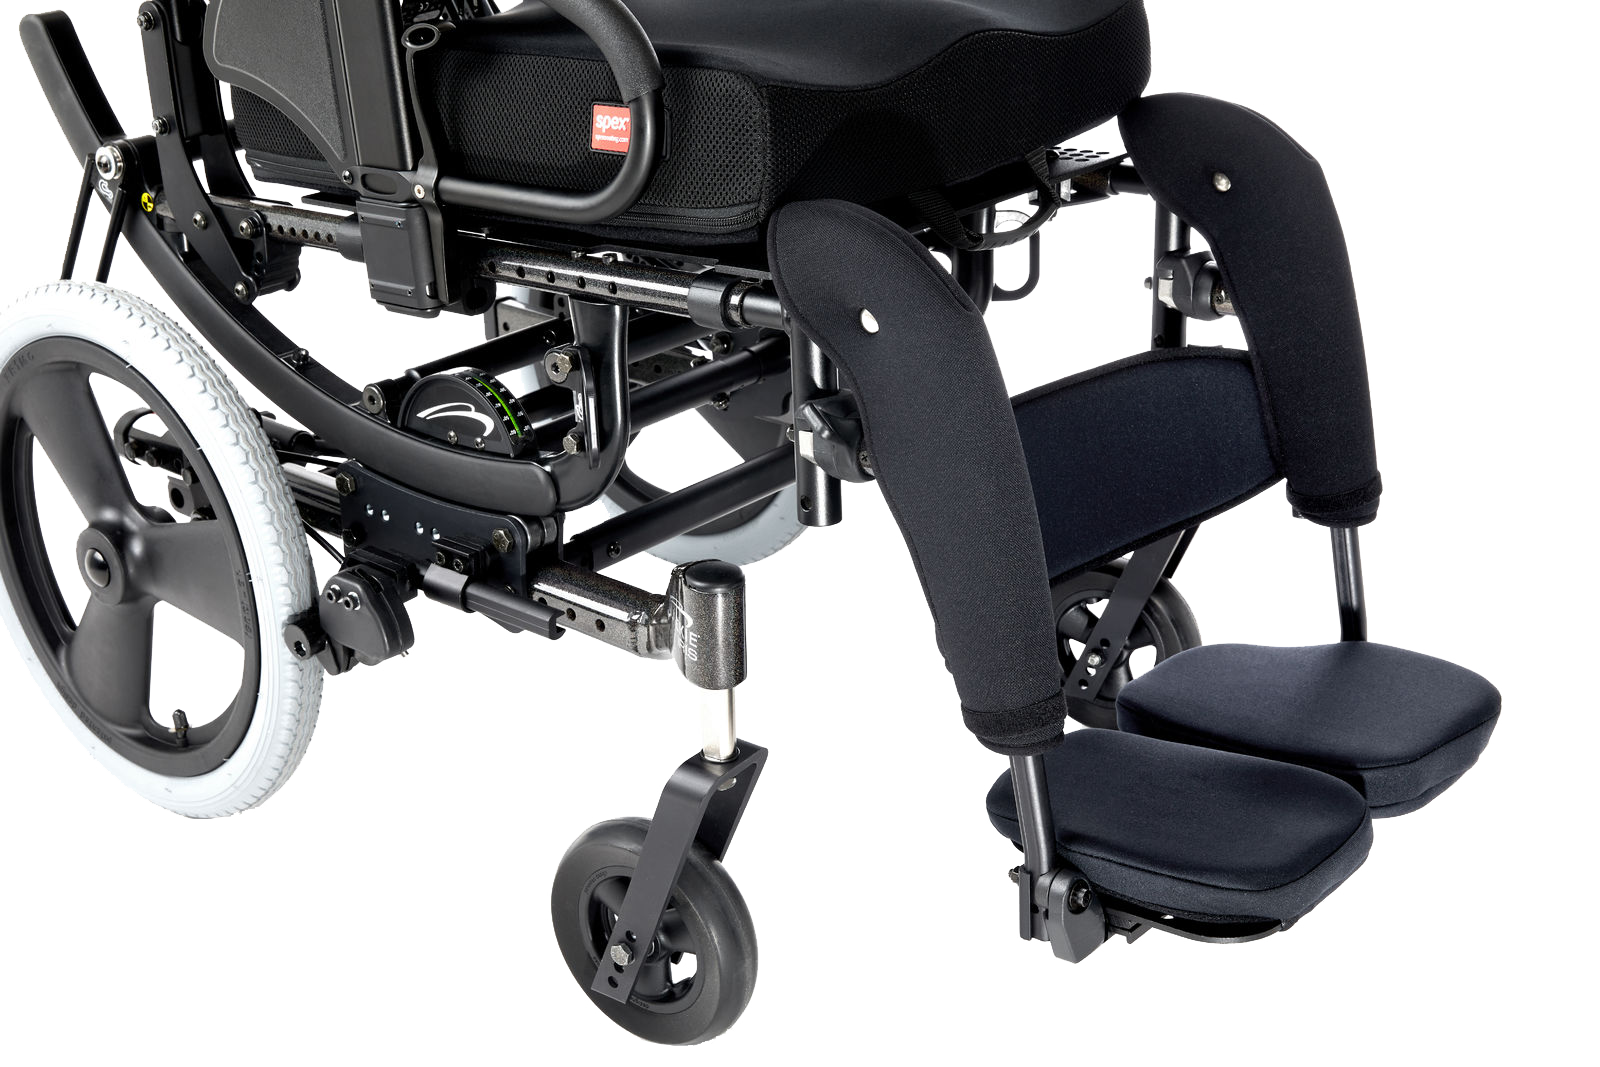 Lower leg support considerations in wheelchair seating – Calf